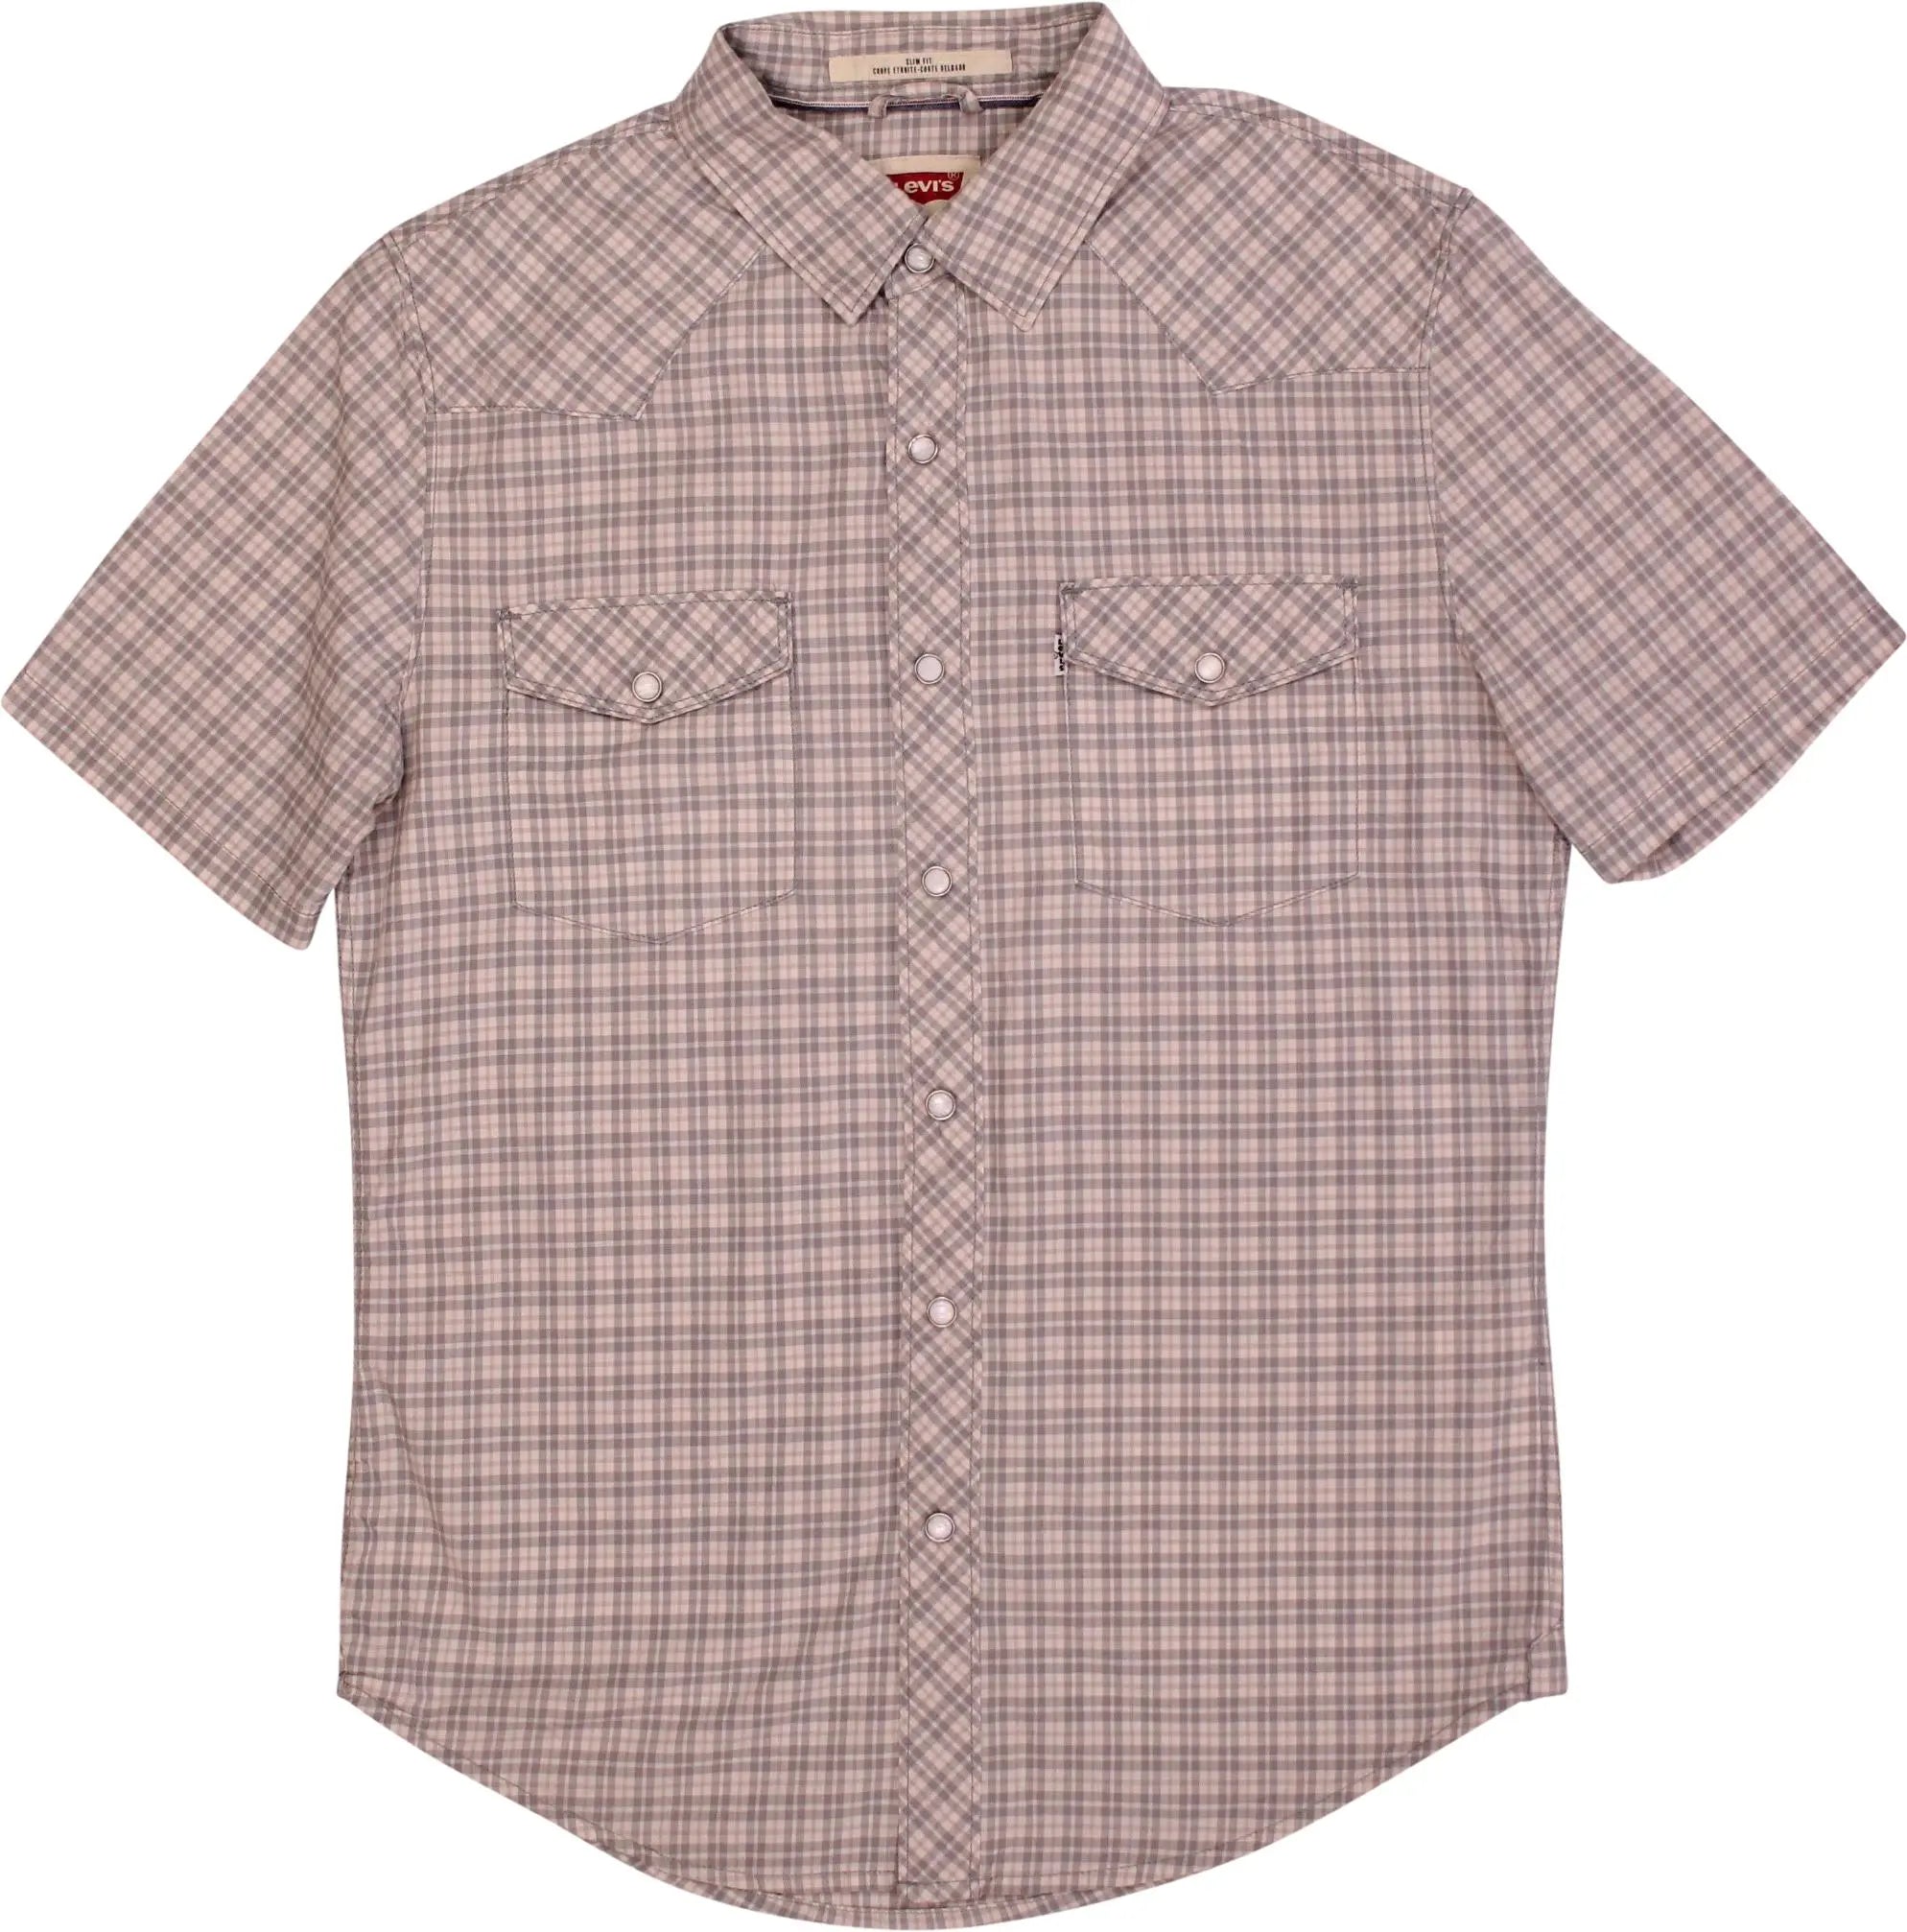 Levi's - Checked Short Sleeve Shirt by Levi's- ThriftTale.com - Vintage and second handclothing